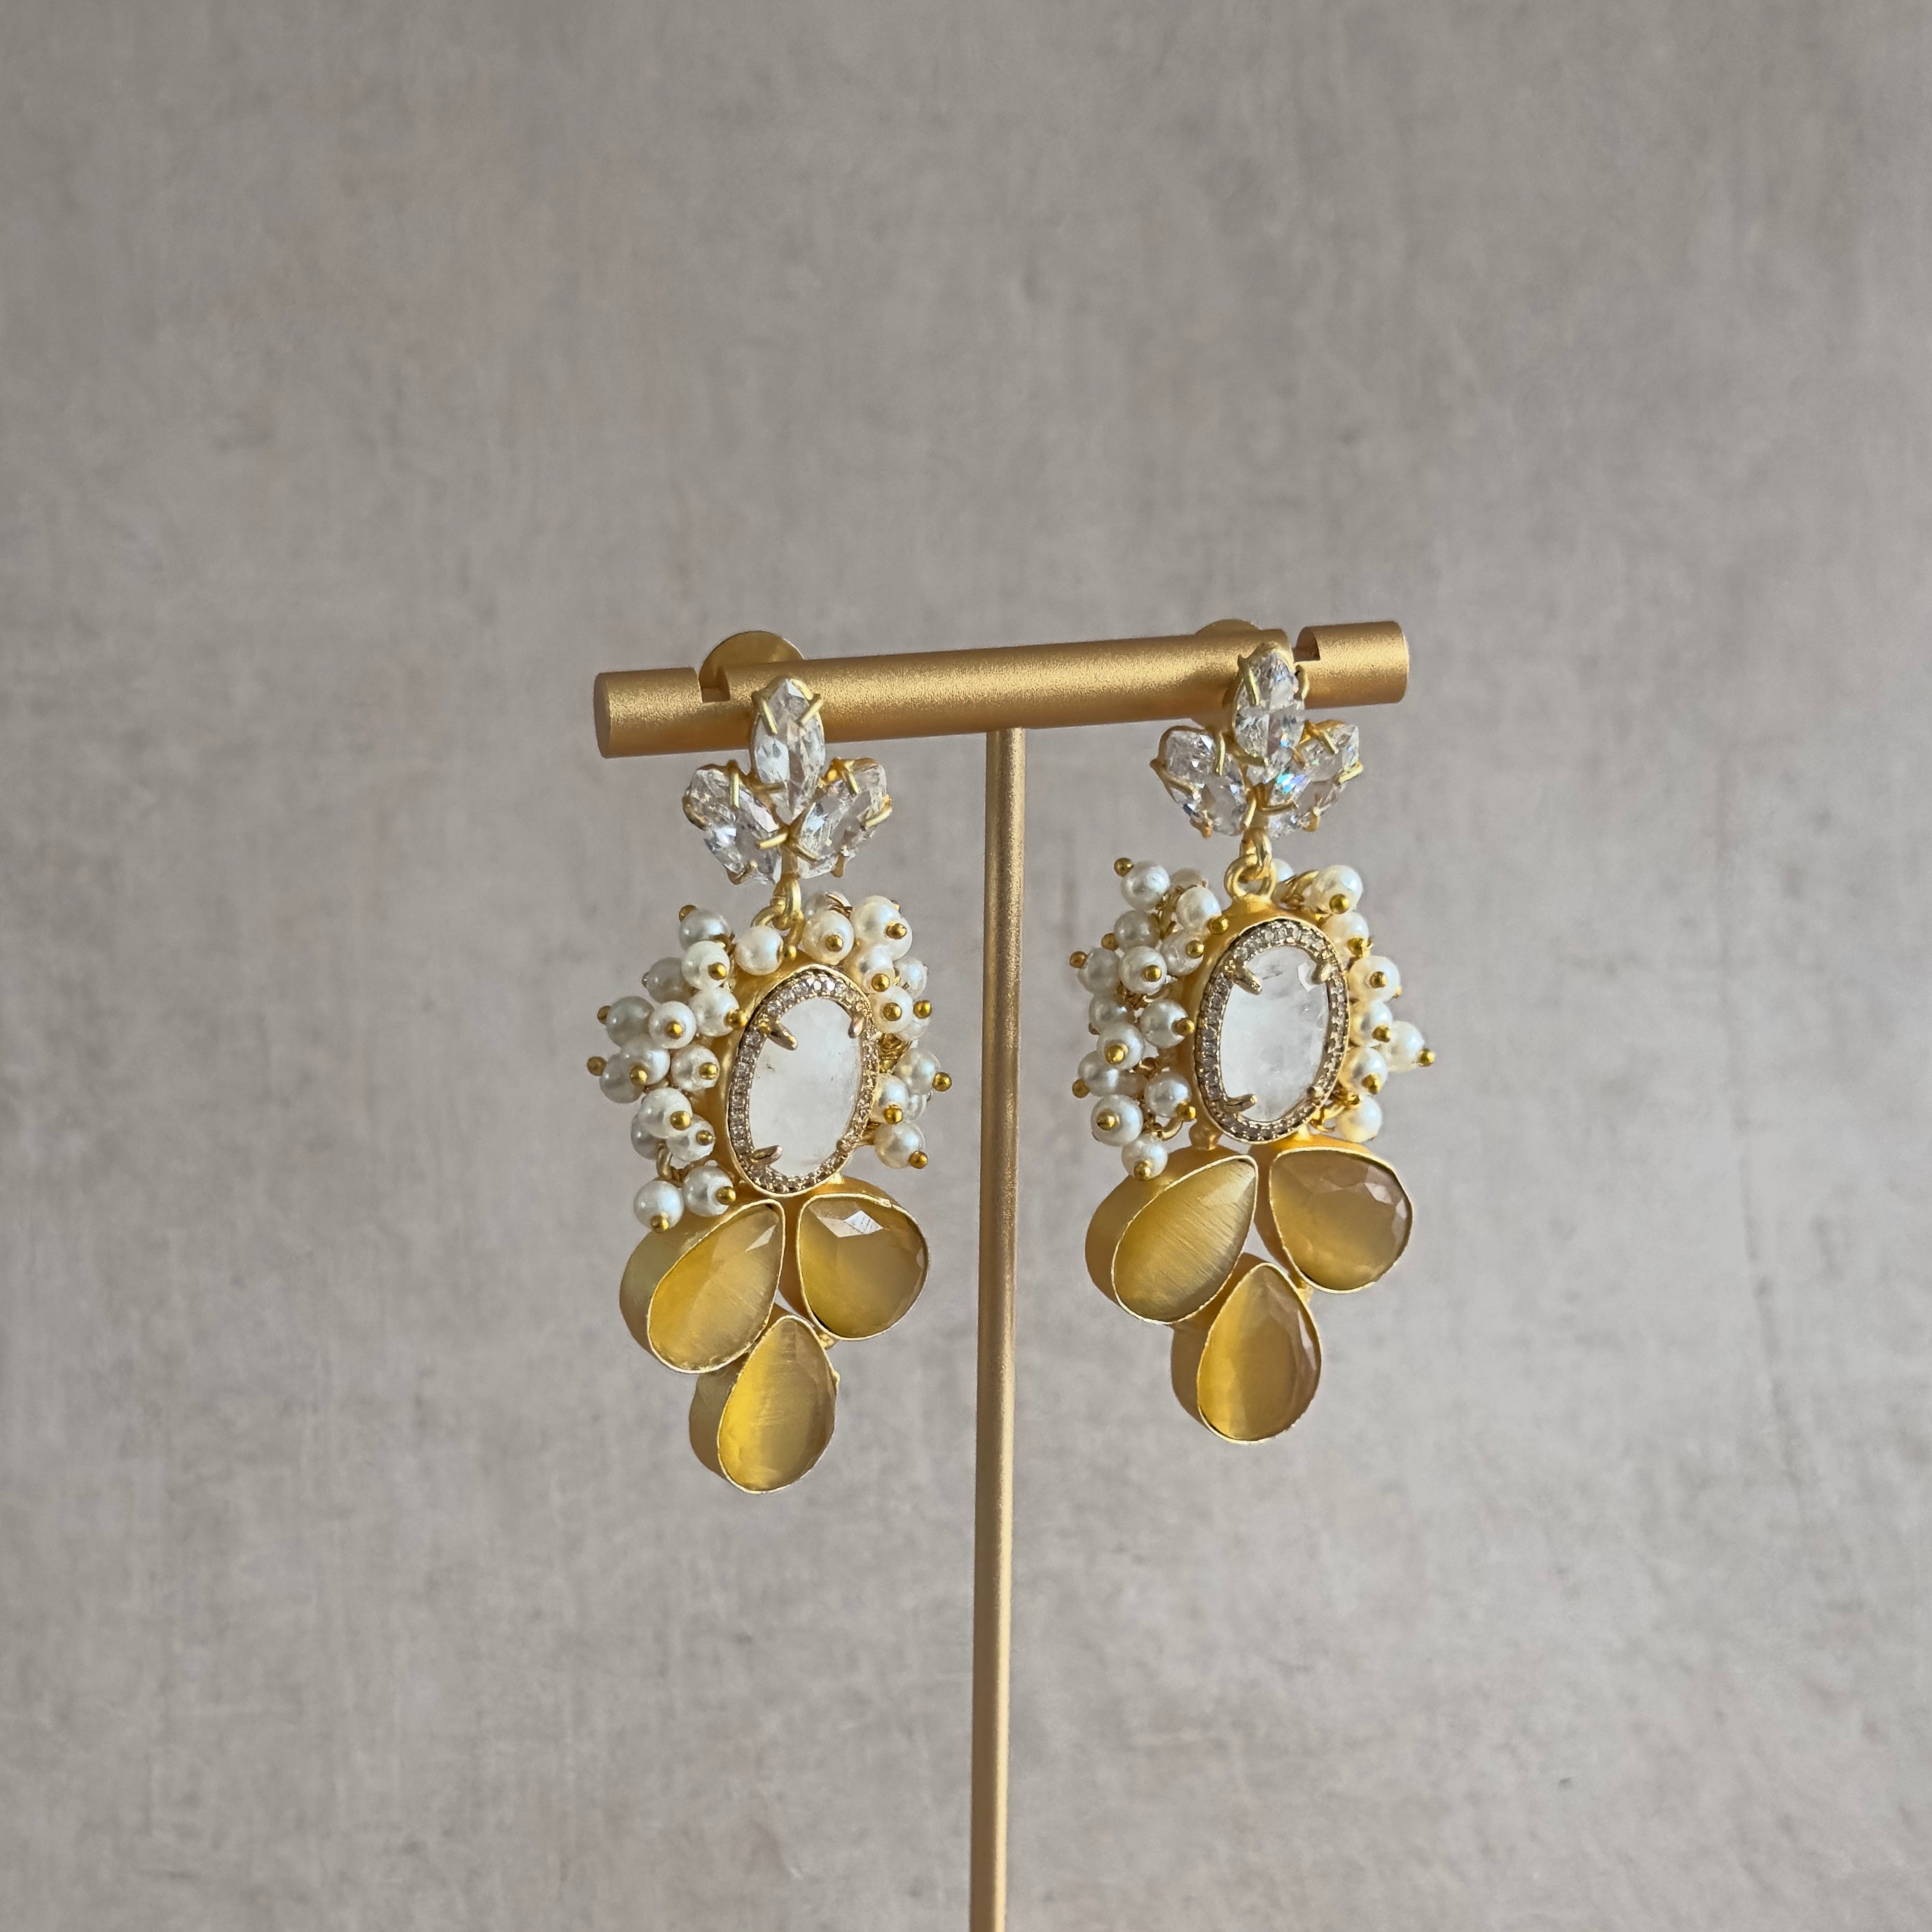 Elevate your summer style with our Silvie Crystal Drop Earrings! The vibrant hues of white and lemon add a touch of playfulness to any outfit. Perfect for those who want to make a statement. Bring out your inner fashionista with these stunning earrings. Order today and be summer ready!